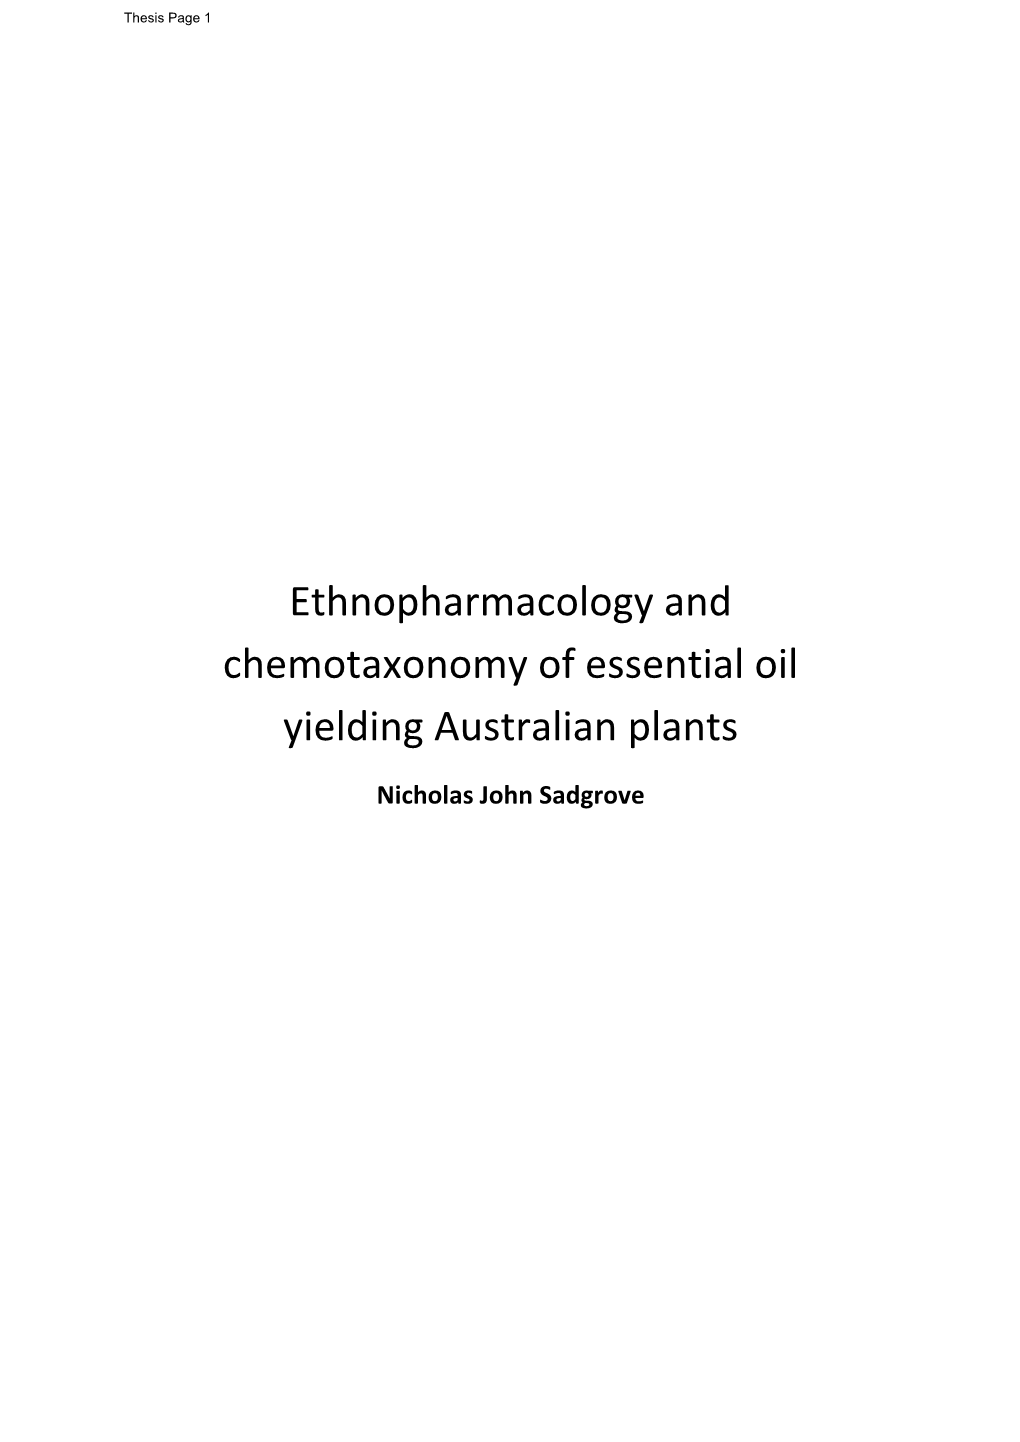 Ethnopharmacology and Chemotaxonomy of Essential Oil Yielding Australian Plants